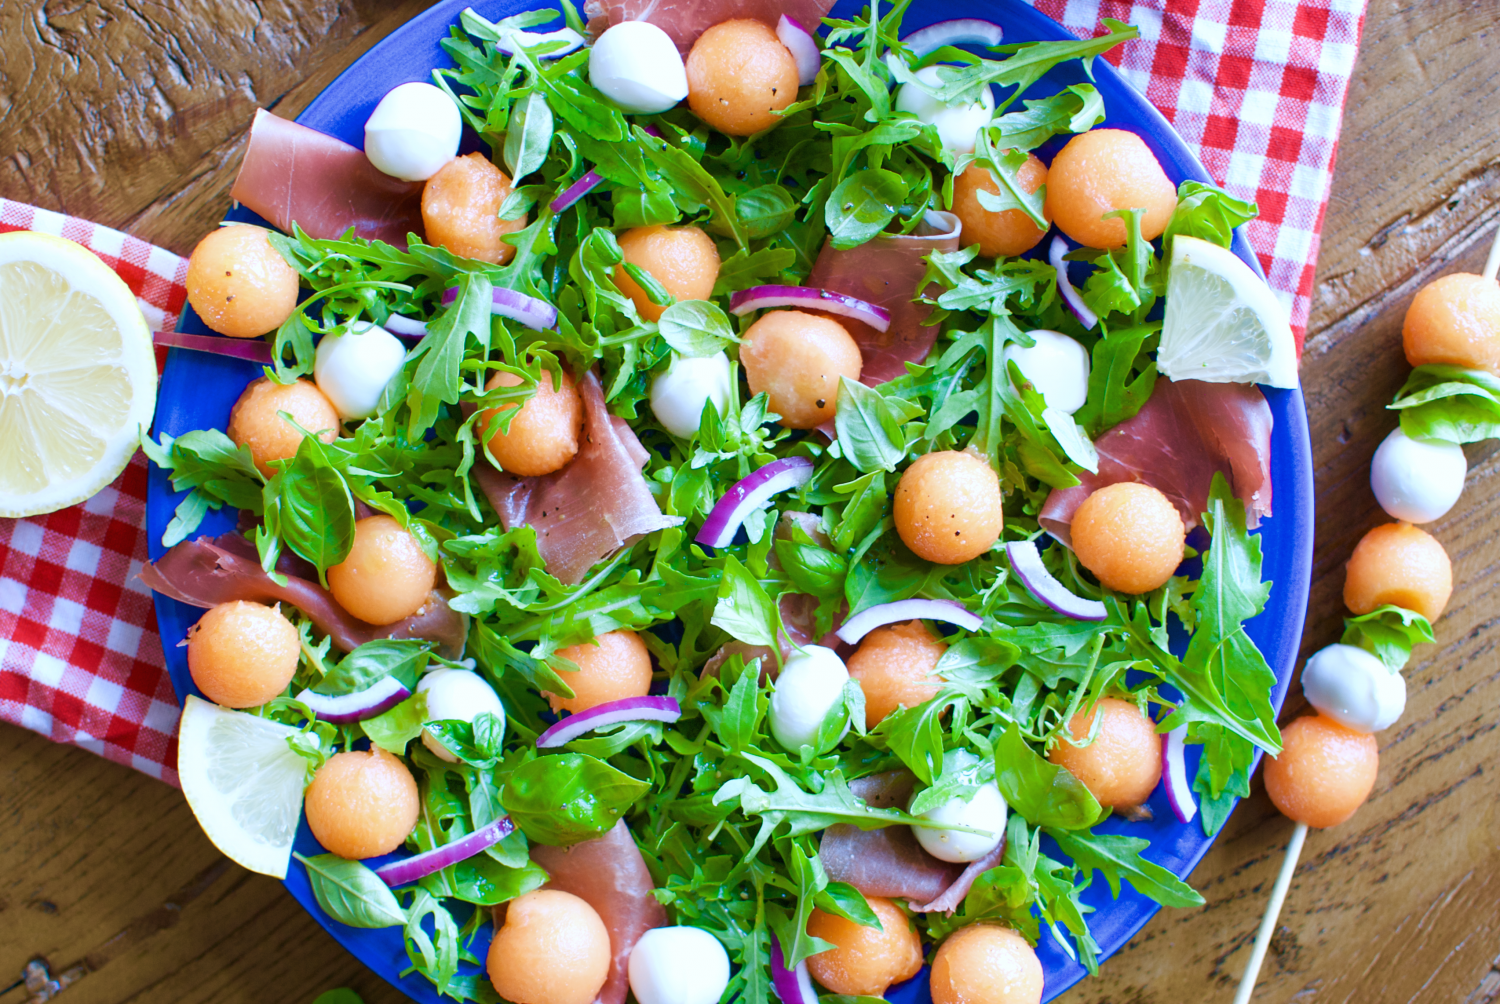 Summer salad with cantaloup melon and prosciutto